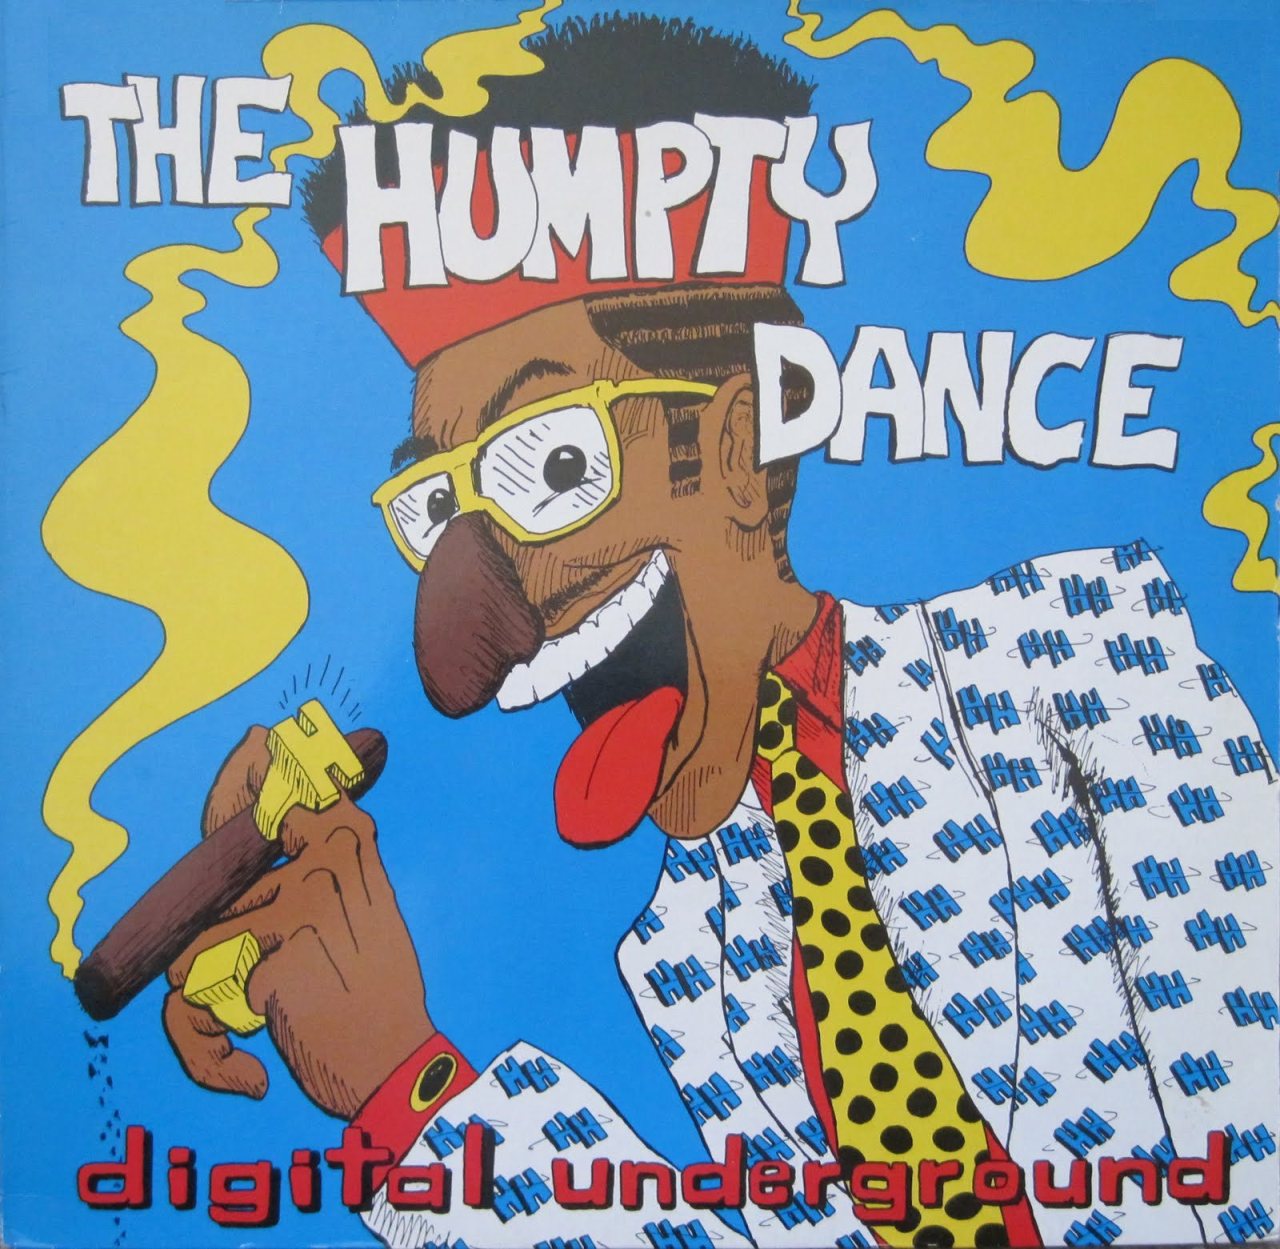 BACK IN THE DAY |3/14/90| Digital Underground released their debut single, The Humpty